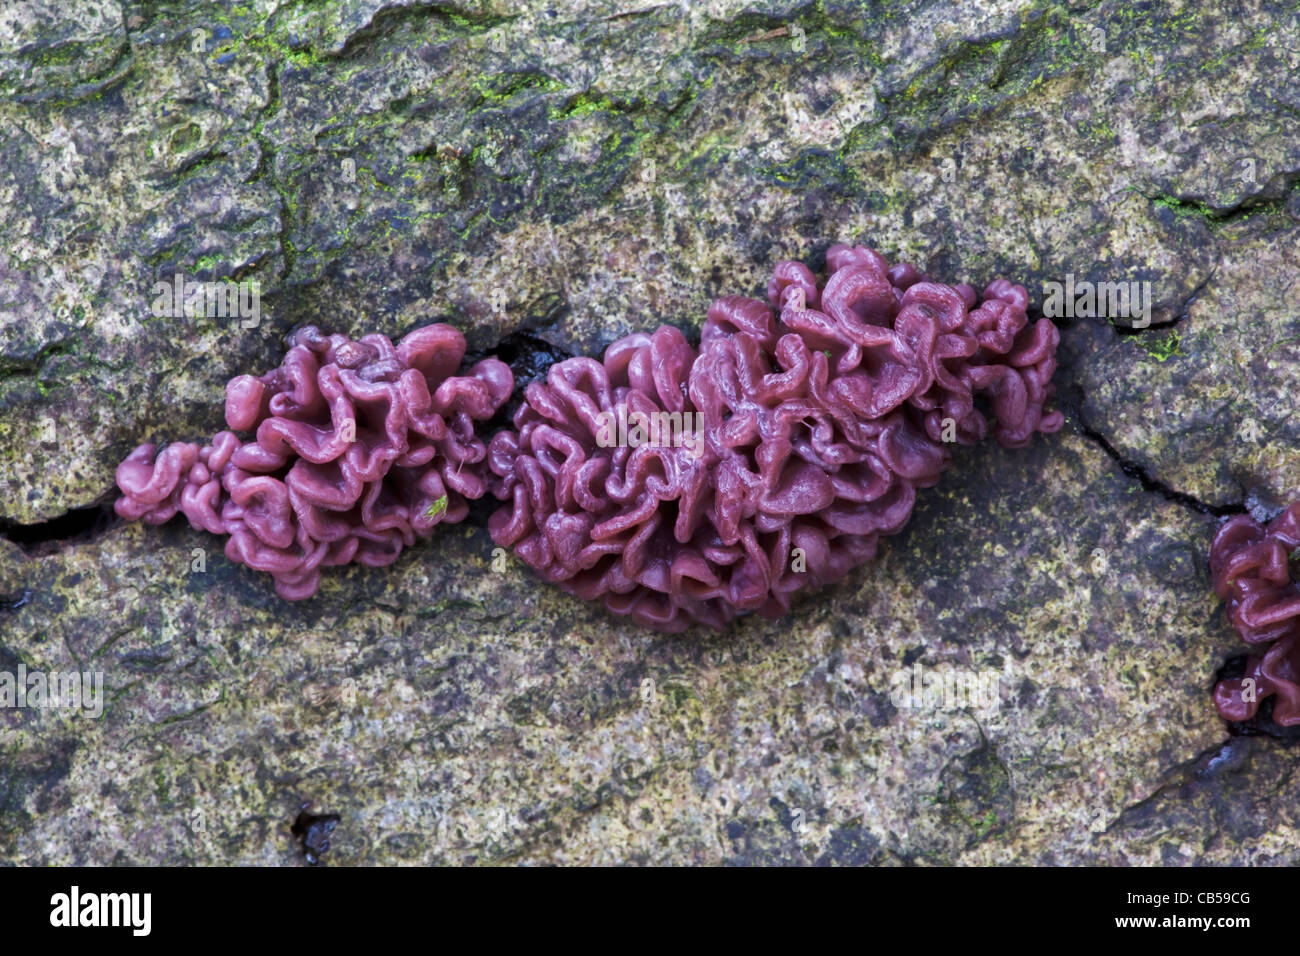 The jelly fungus Purple Jellydisc - Ascocoryne sarcoides Stock Photo